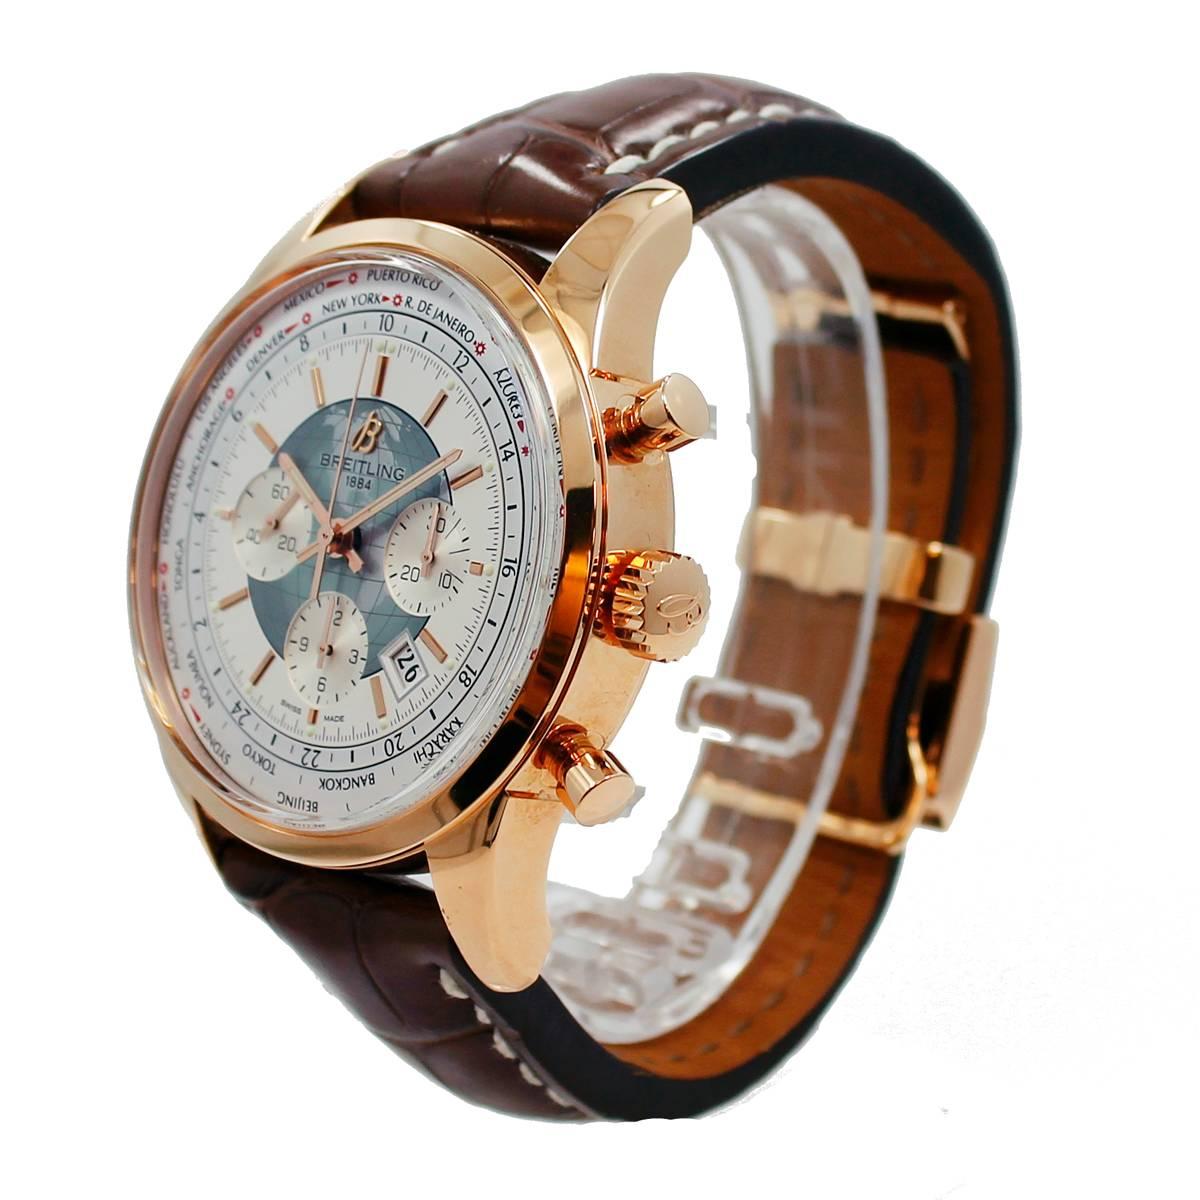 18K Rose Gold Breitling Transocean Chronograph Unitime RB0510U0/A733. This time piece is equipped with Breitling Calibre 05 fully in-house movement and can show the time in all 24 time zones at once. you turn the crown forwards or backwards and it